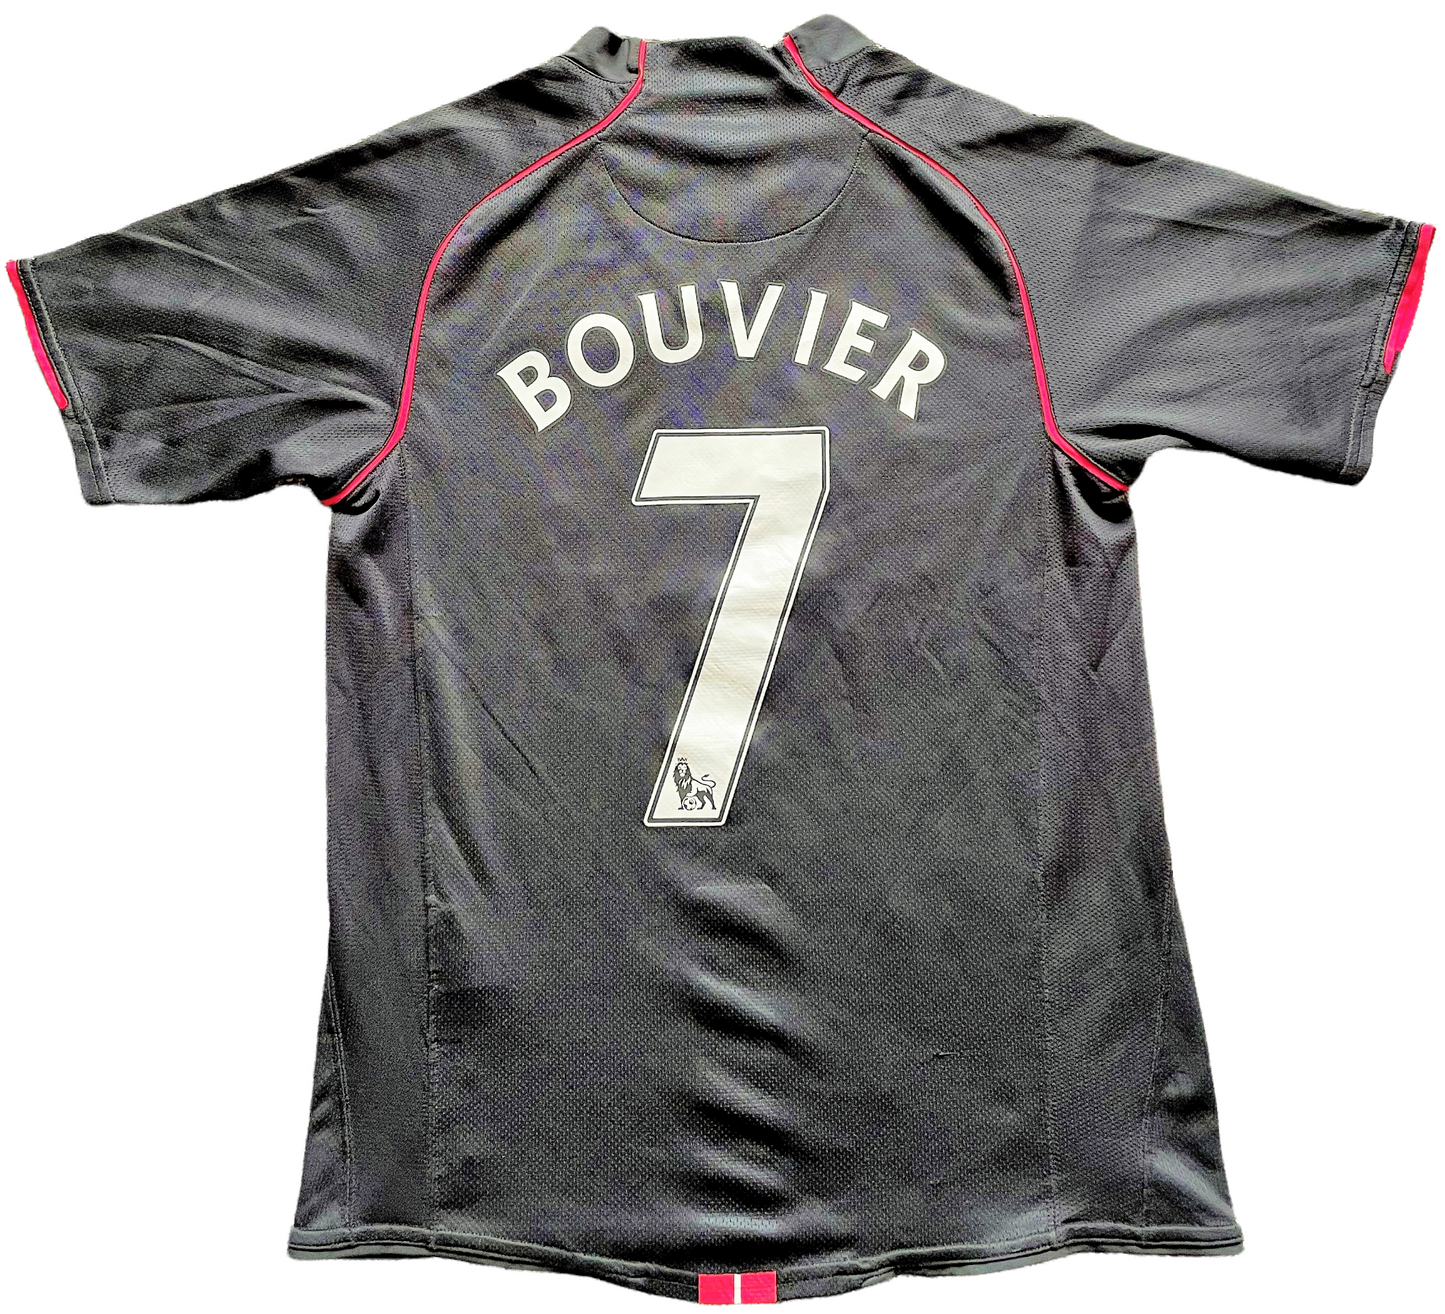 2007-08 Man United Away Shirt BOUVIER #7 (very good) Adults Small. Height 21 inches